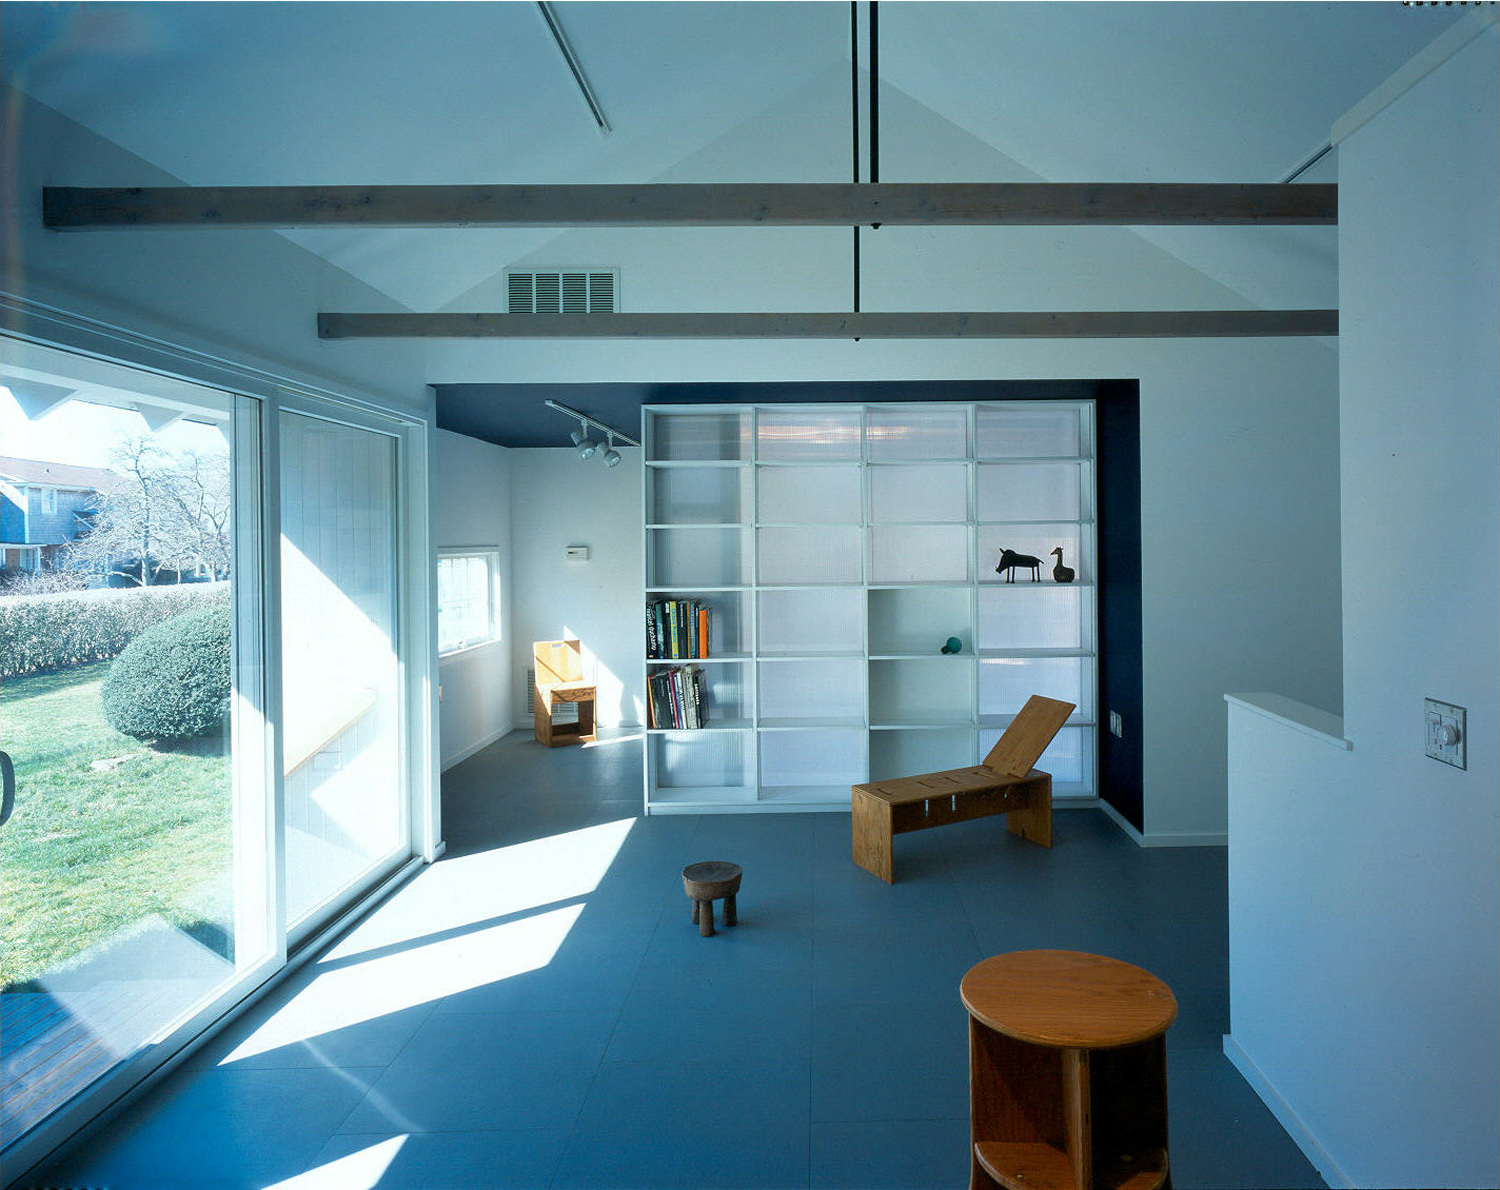  Barn Room with a Translucent Partition  